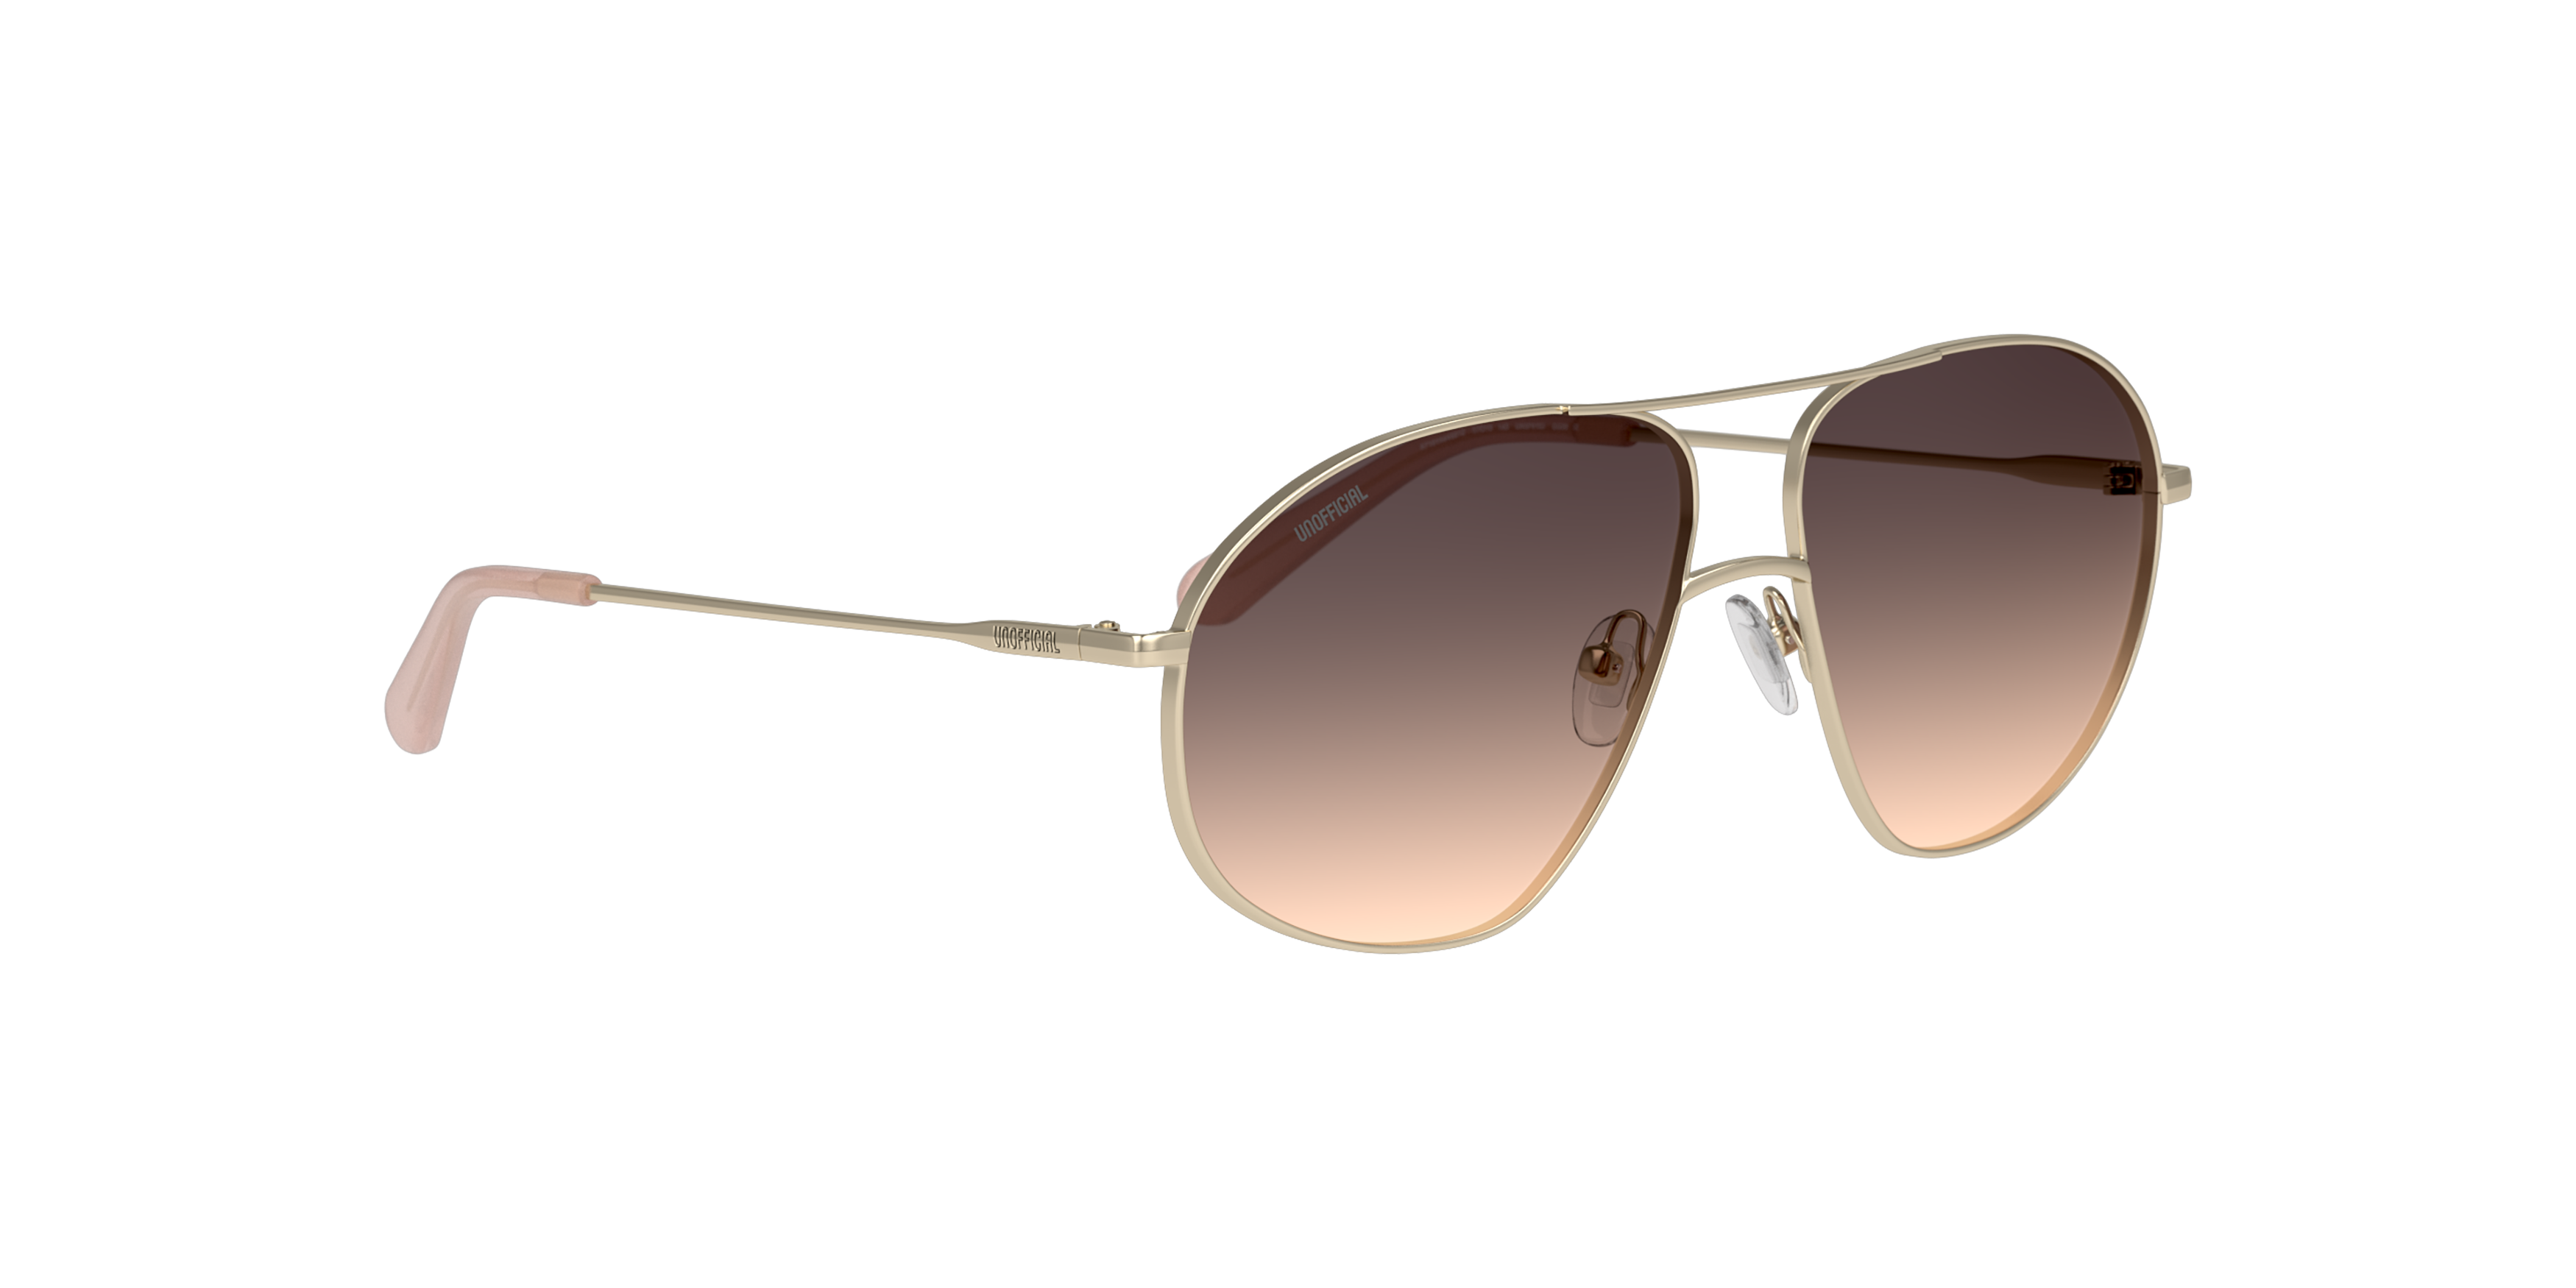 Angle_Right01 Unofficial UNSF0183 (DDP0) Sunglasses Pink / Gold